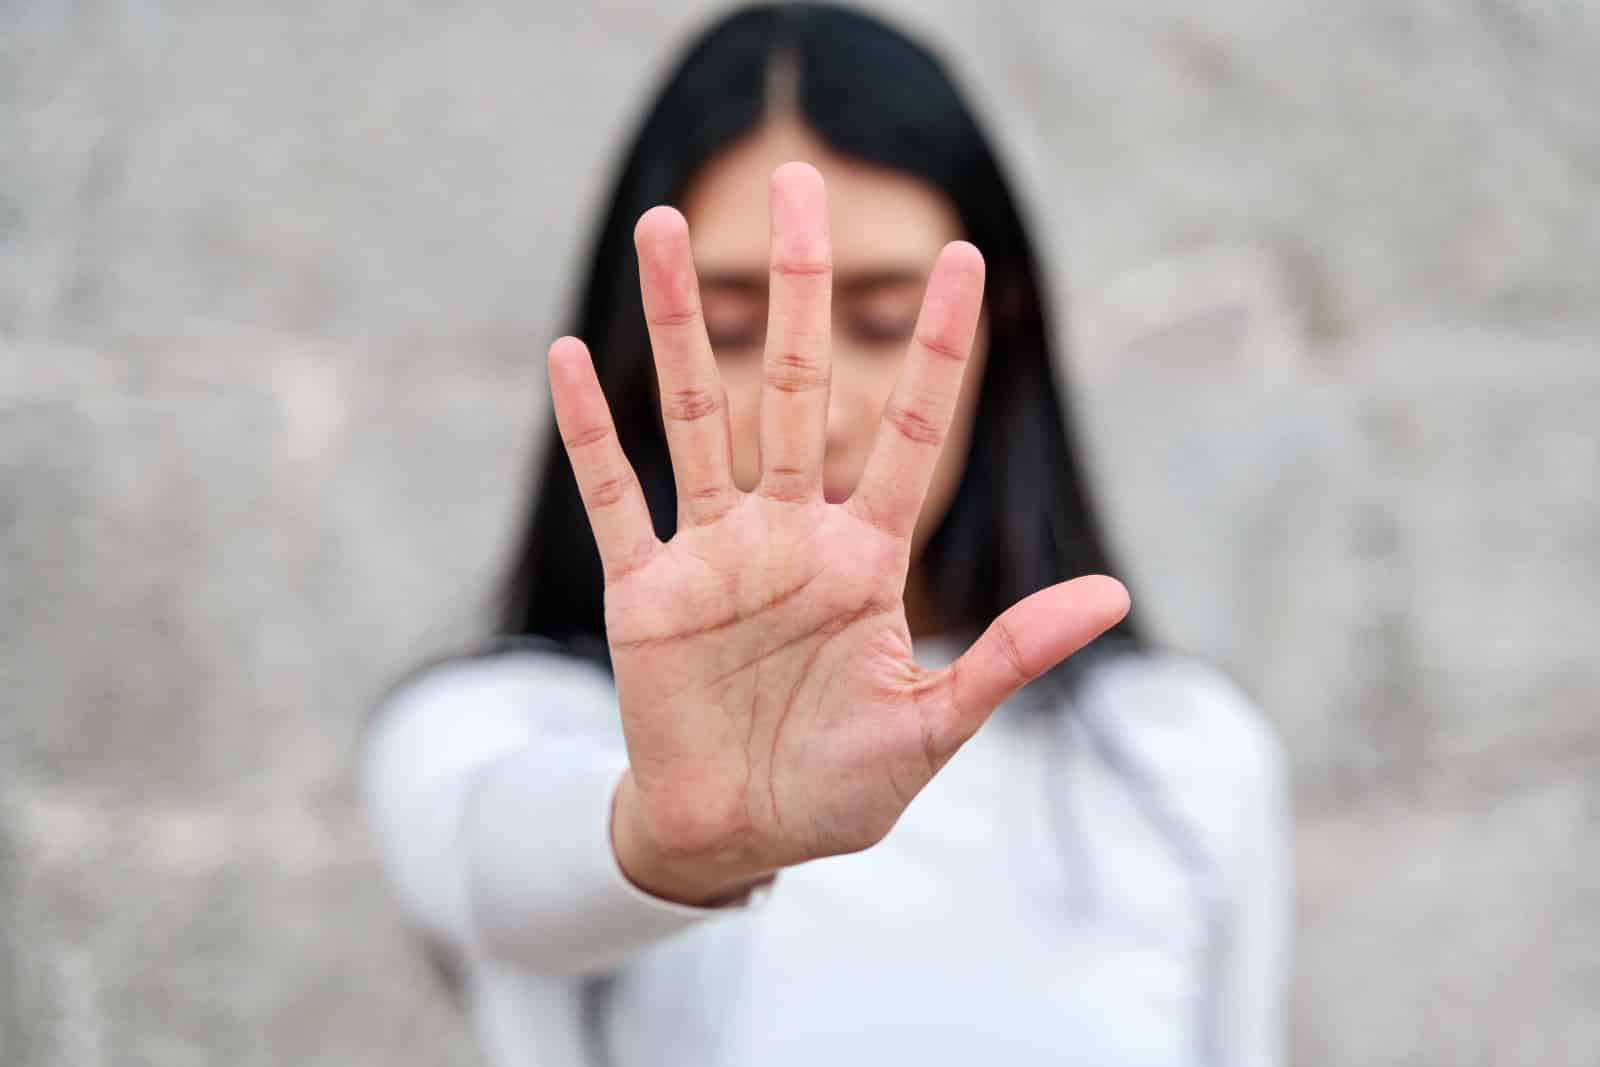 Image Credit: Shutterstock / Oscar M Sanchez <p><span>The rise of gender critical feminism has led to heated debates within the feminist community, particularly around the rights and inclusion of transgender individuals, causing rifts and intense discussions on gender identity and women’s spaces.</span></p>